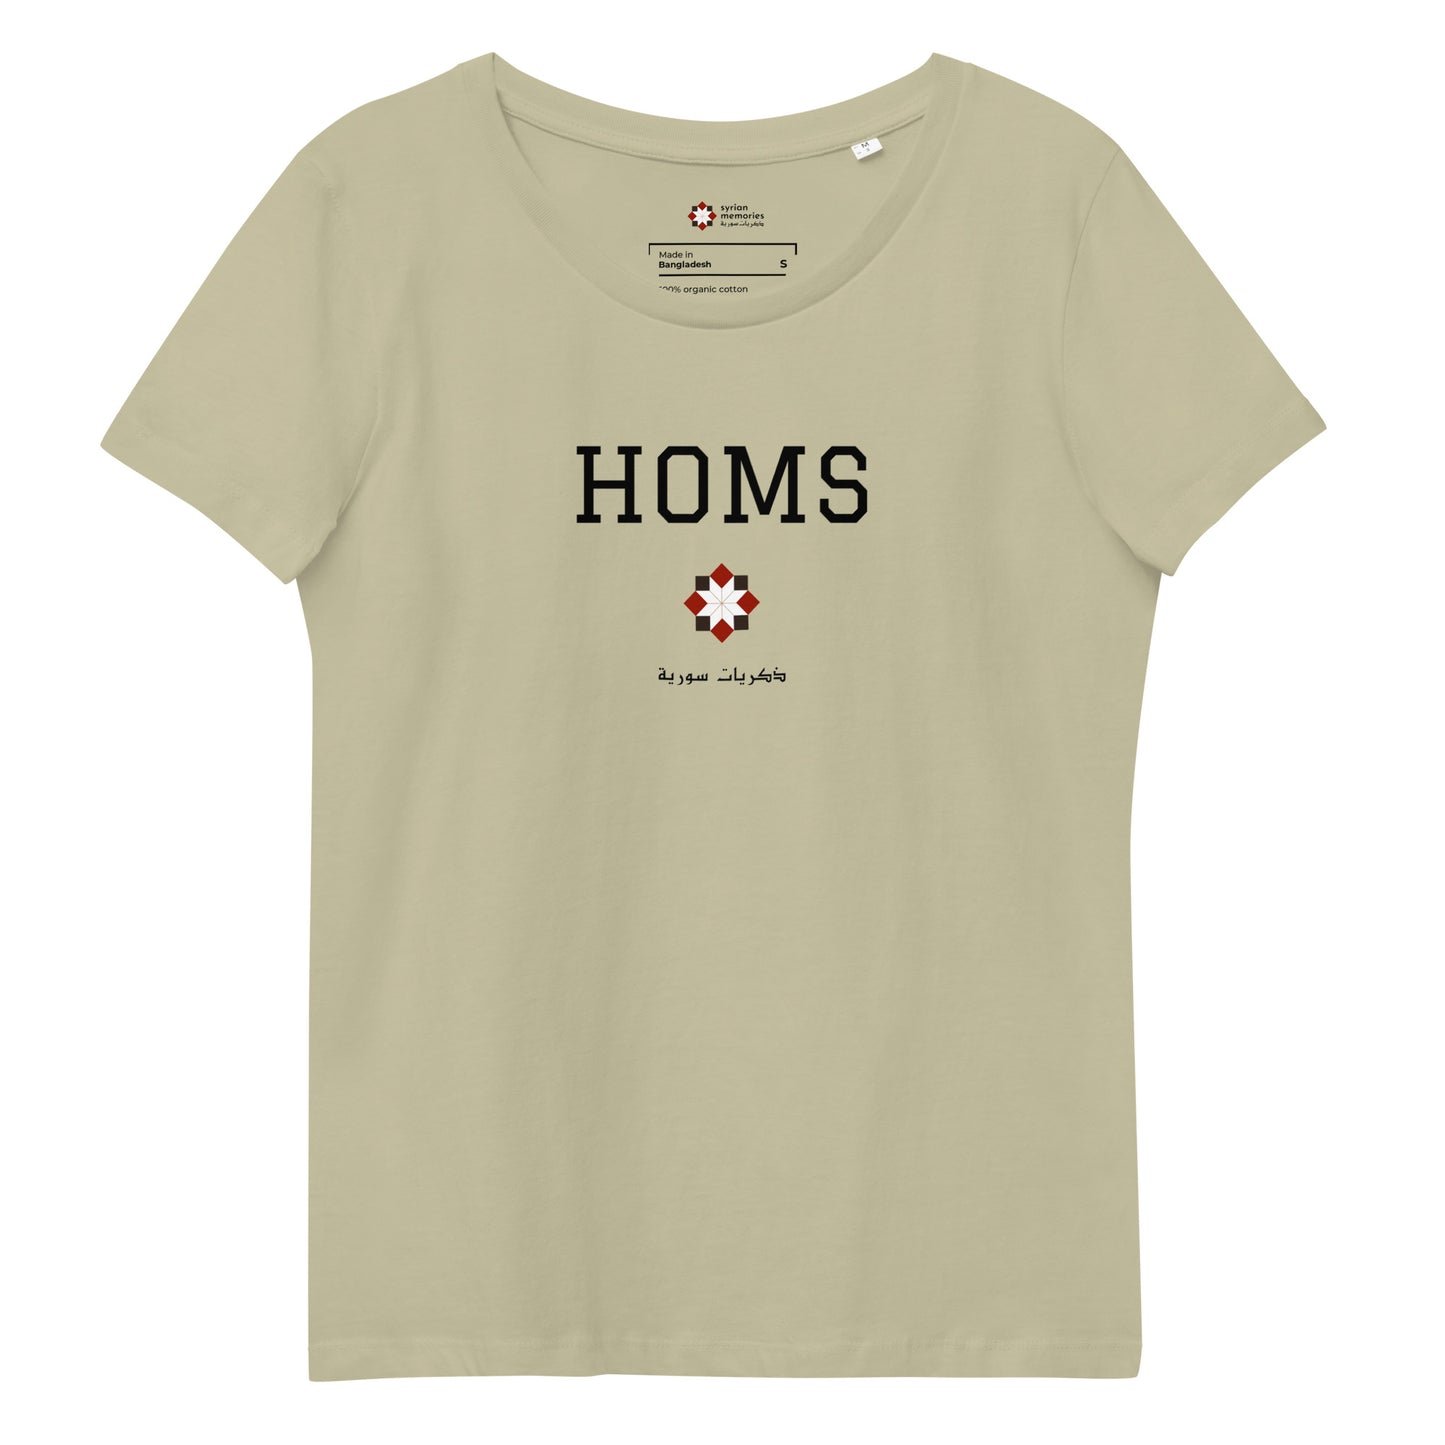 Homs - University Collection - Women's Fitted Eco Tee